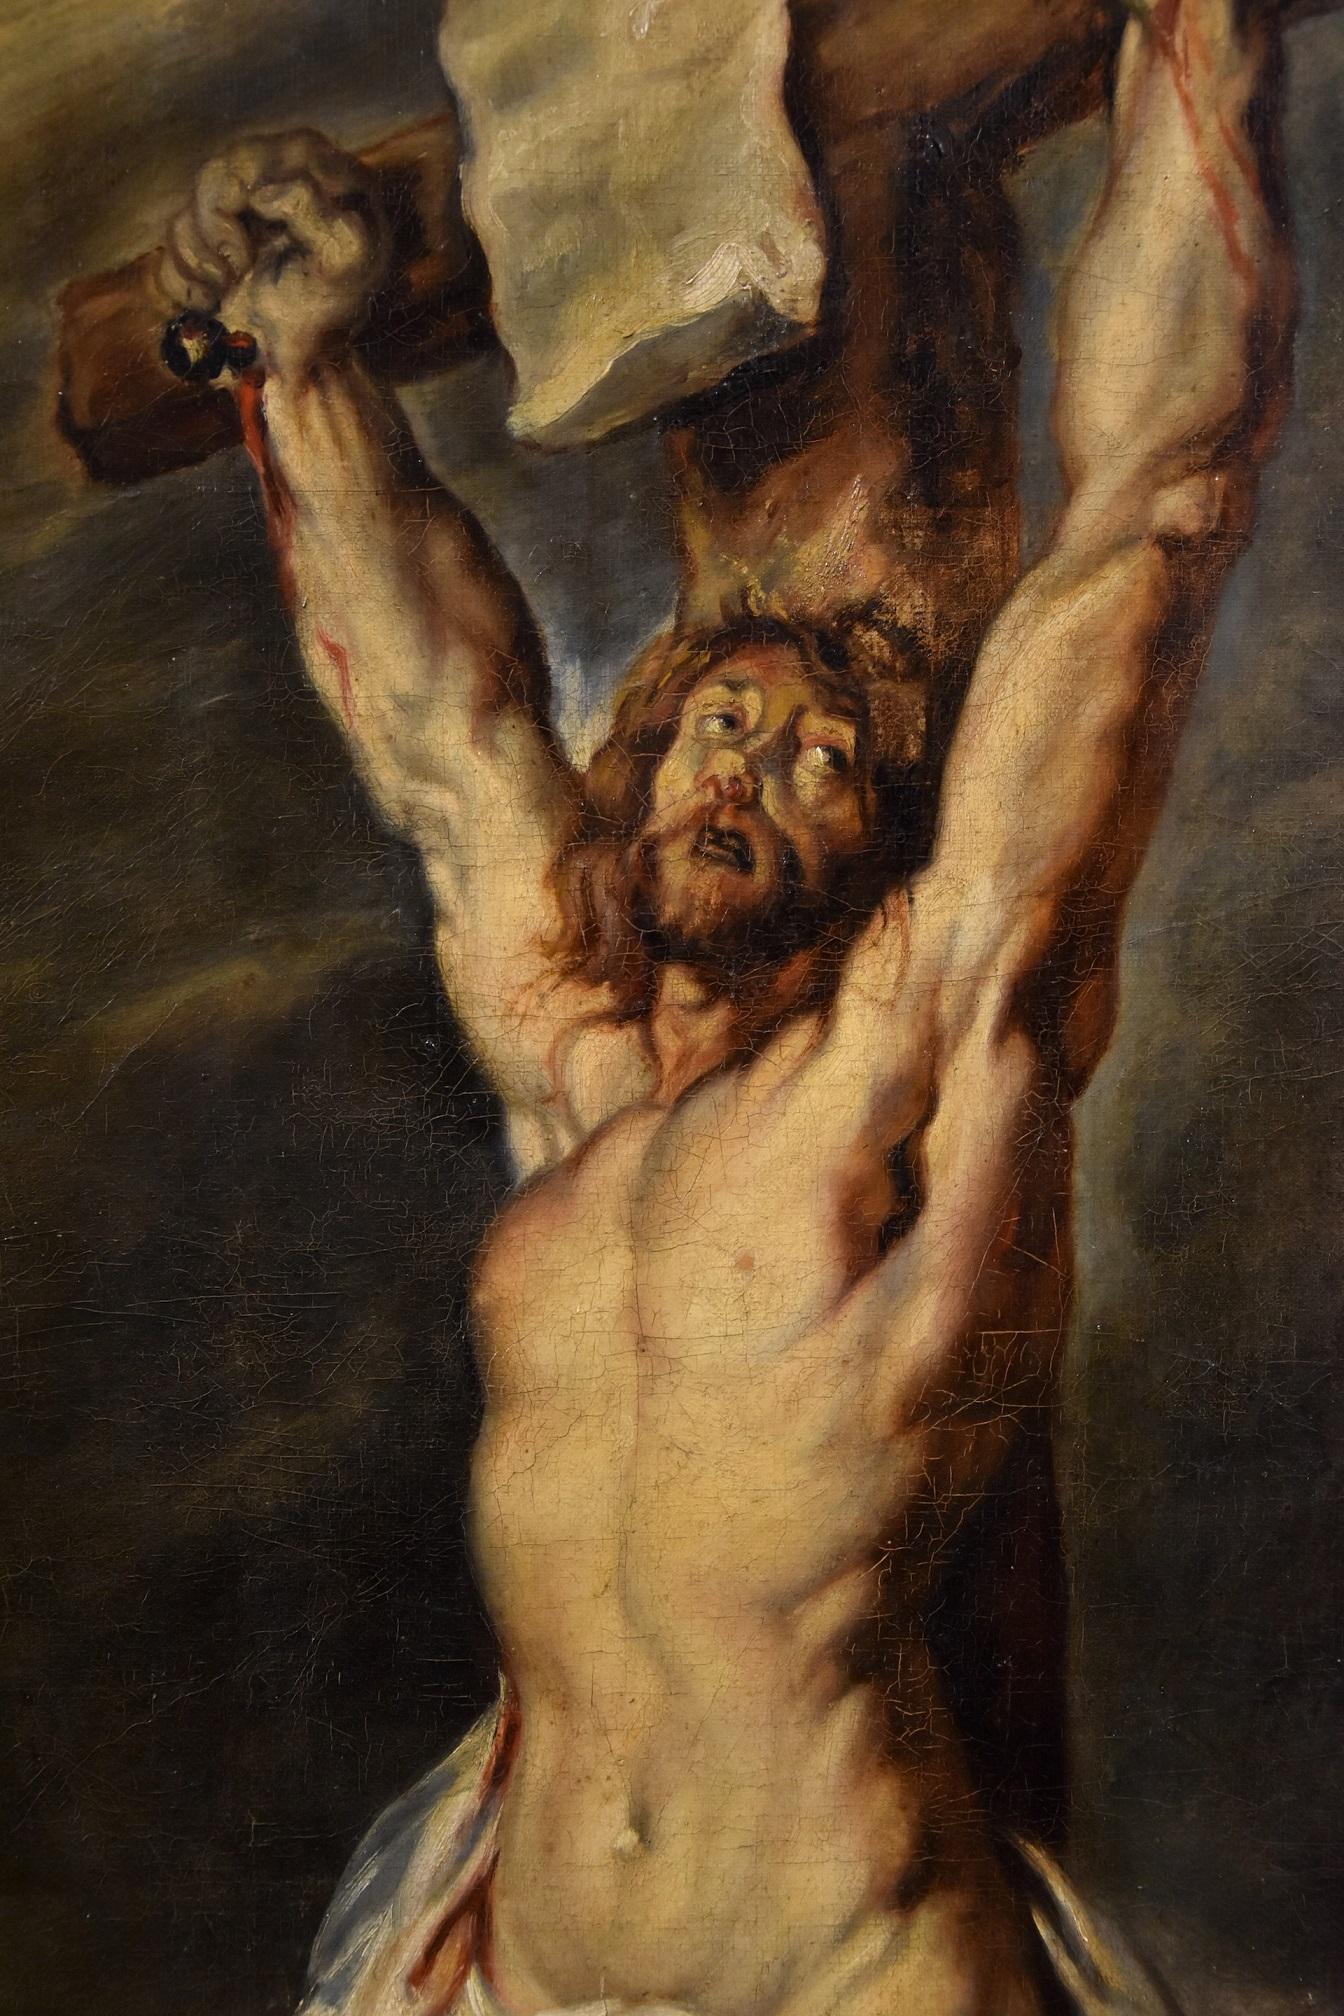 Christ Crucified Rubens Paint Oil on canvas Old master 17th Century Religious - Brown Portrait Painting by Peter Paul Rubens (Siegen 1577 - Antwerp 1640)